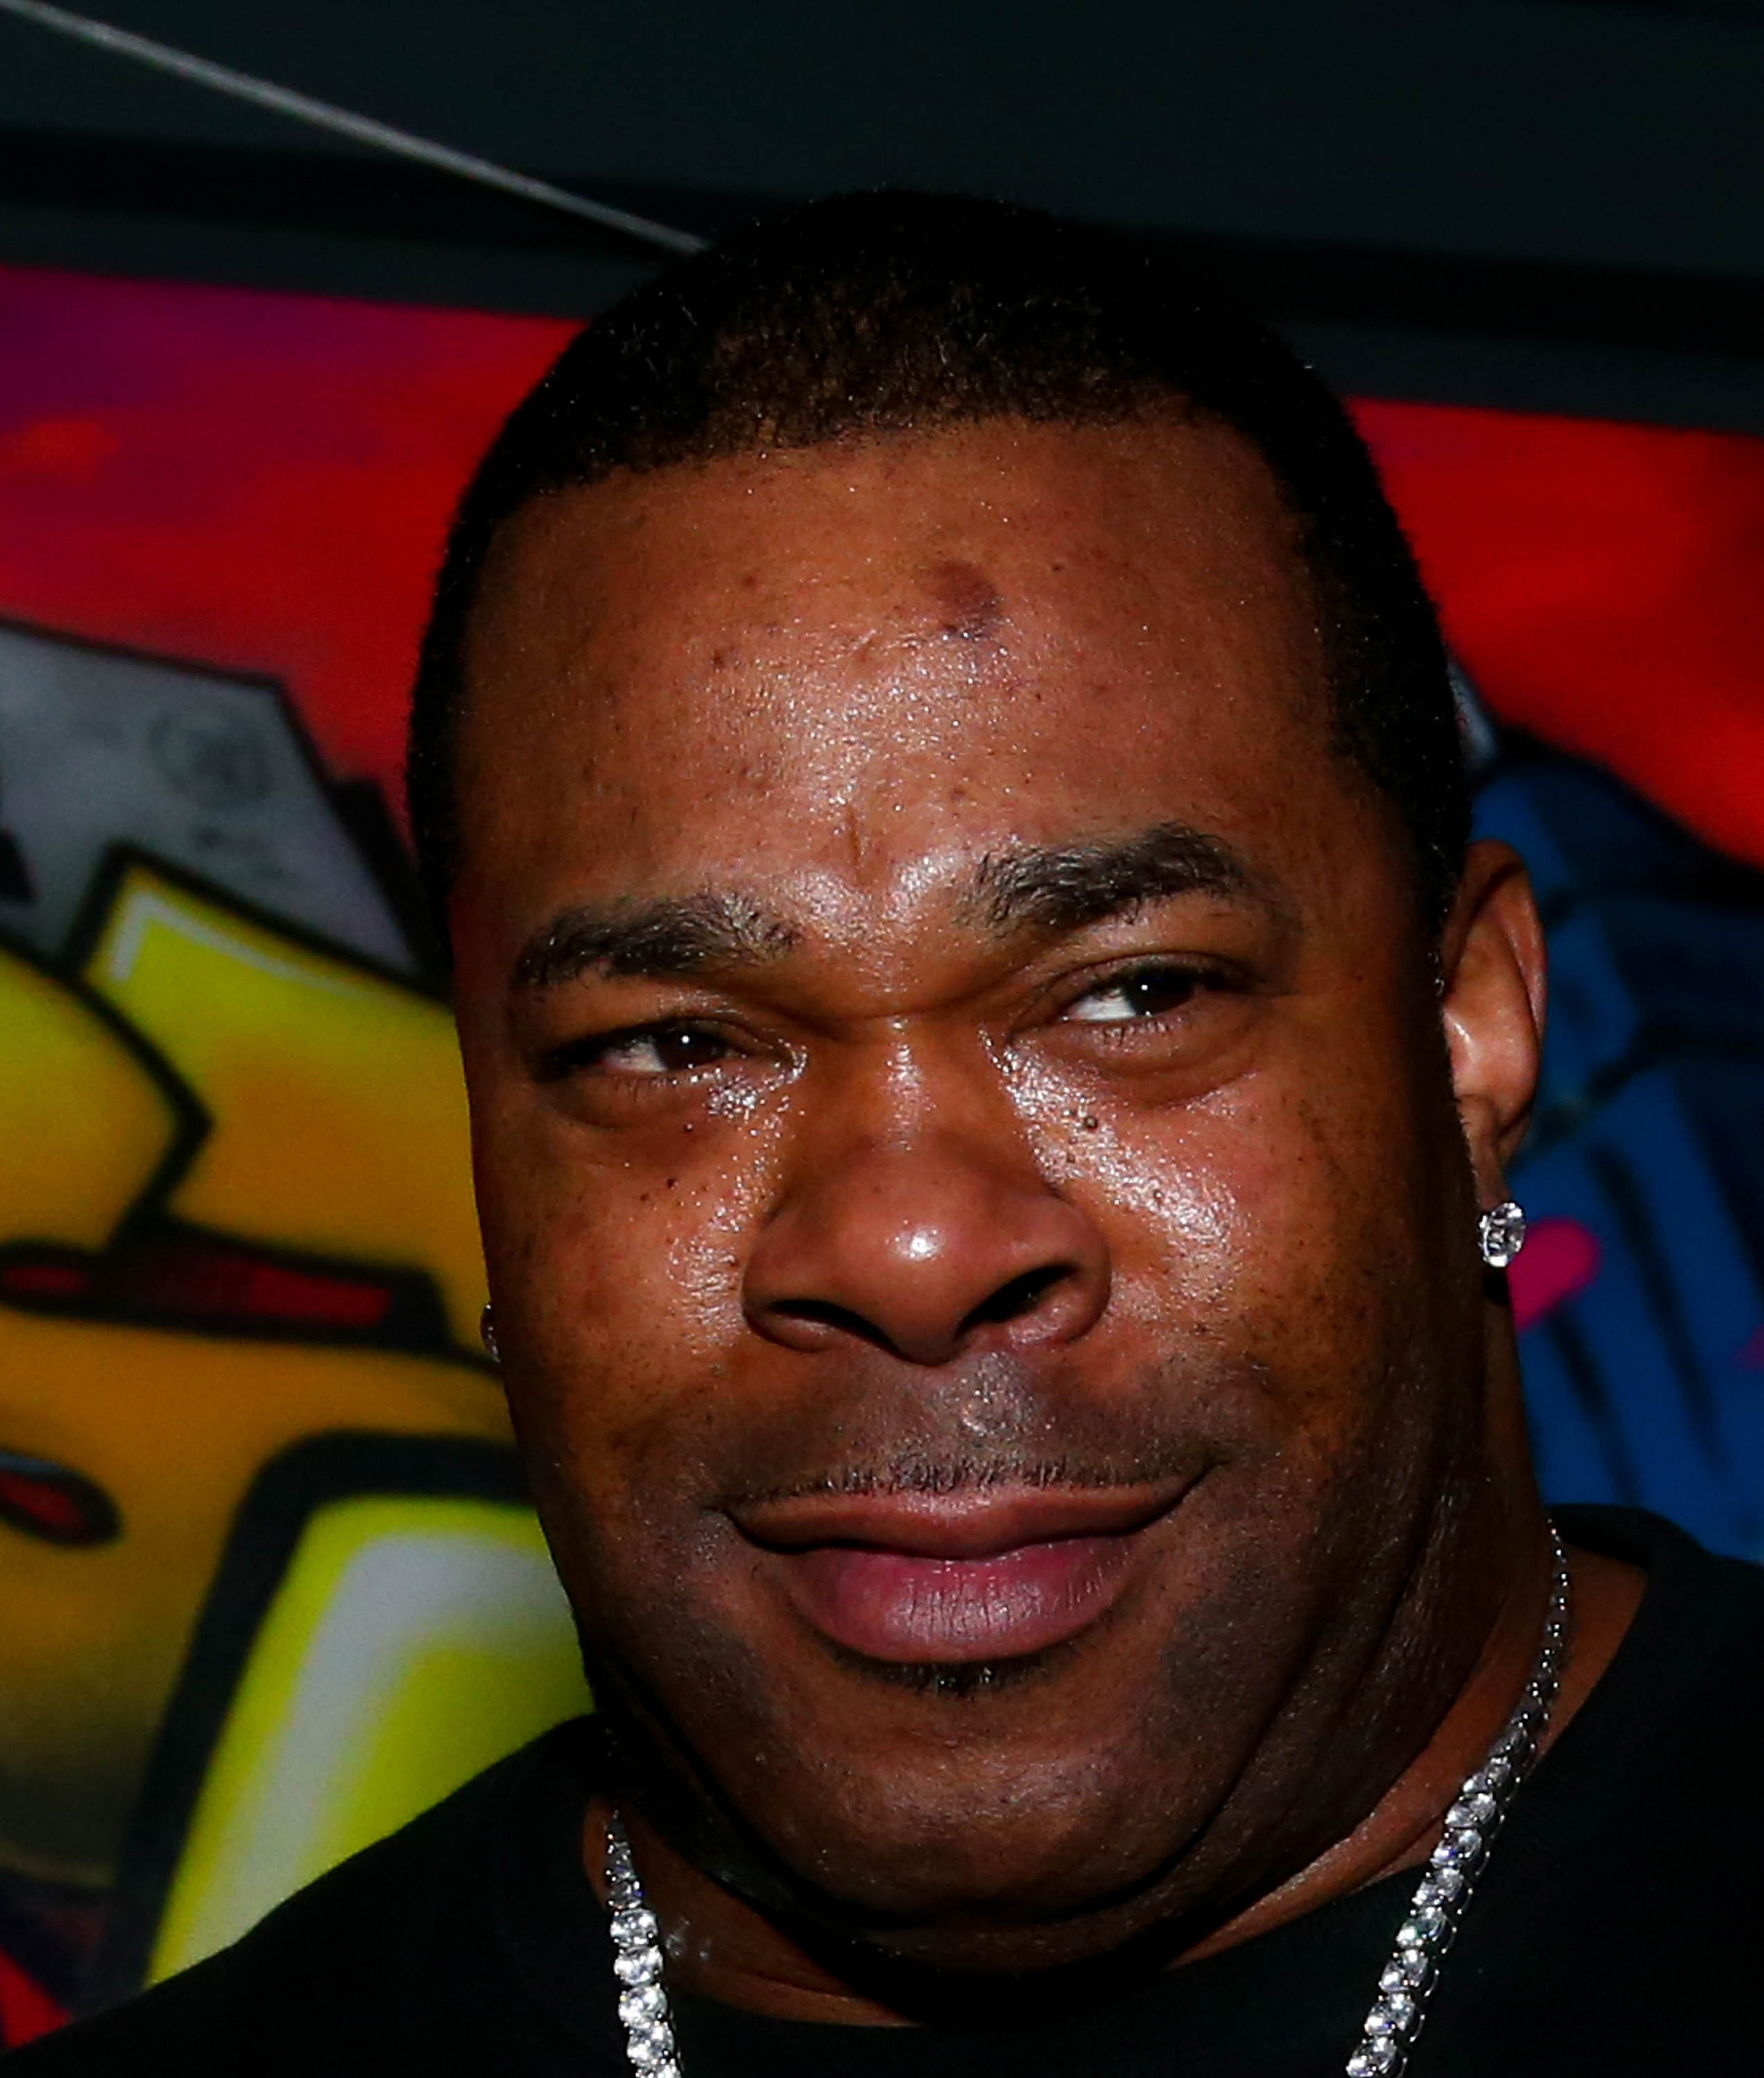 Close-up of Busta Rhymes at an event, wearing diamond earrings and a necklace